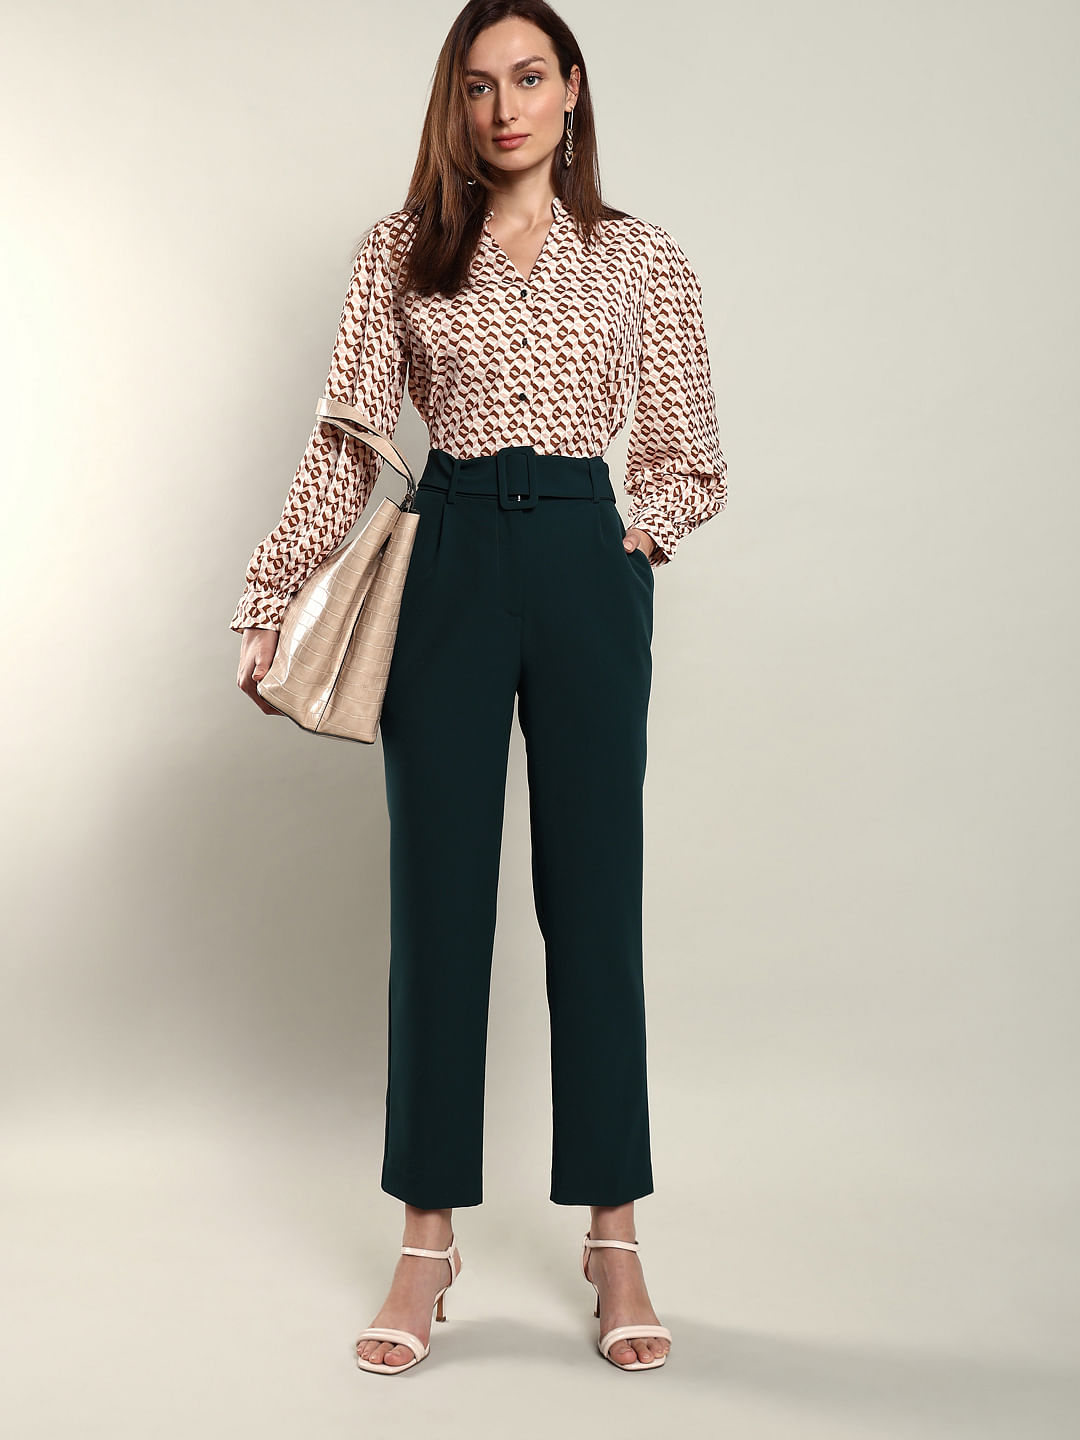 Jack Wills High Waisted Trousers | SportsDirect.com Lithuania